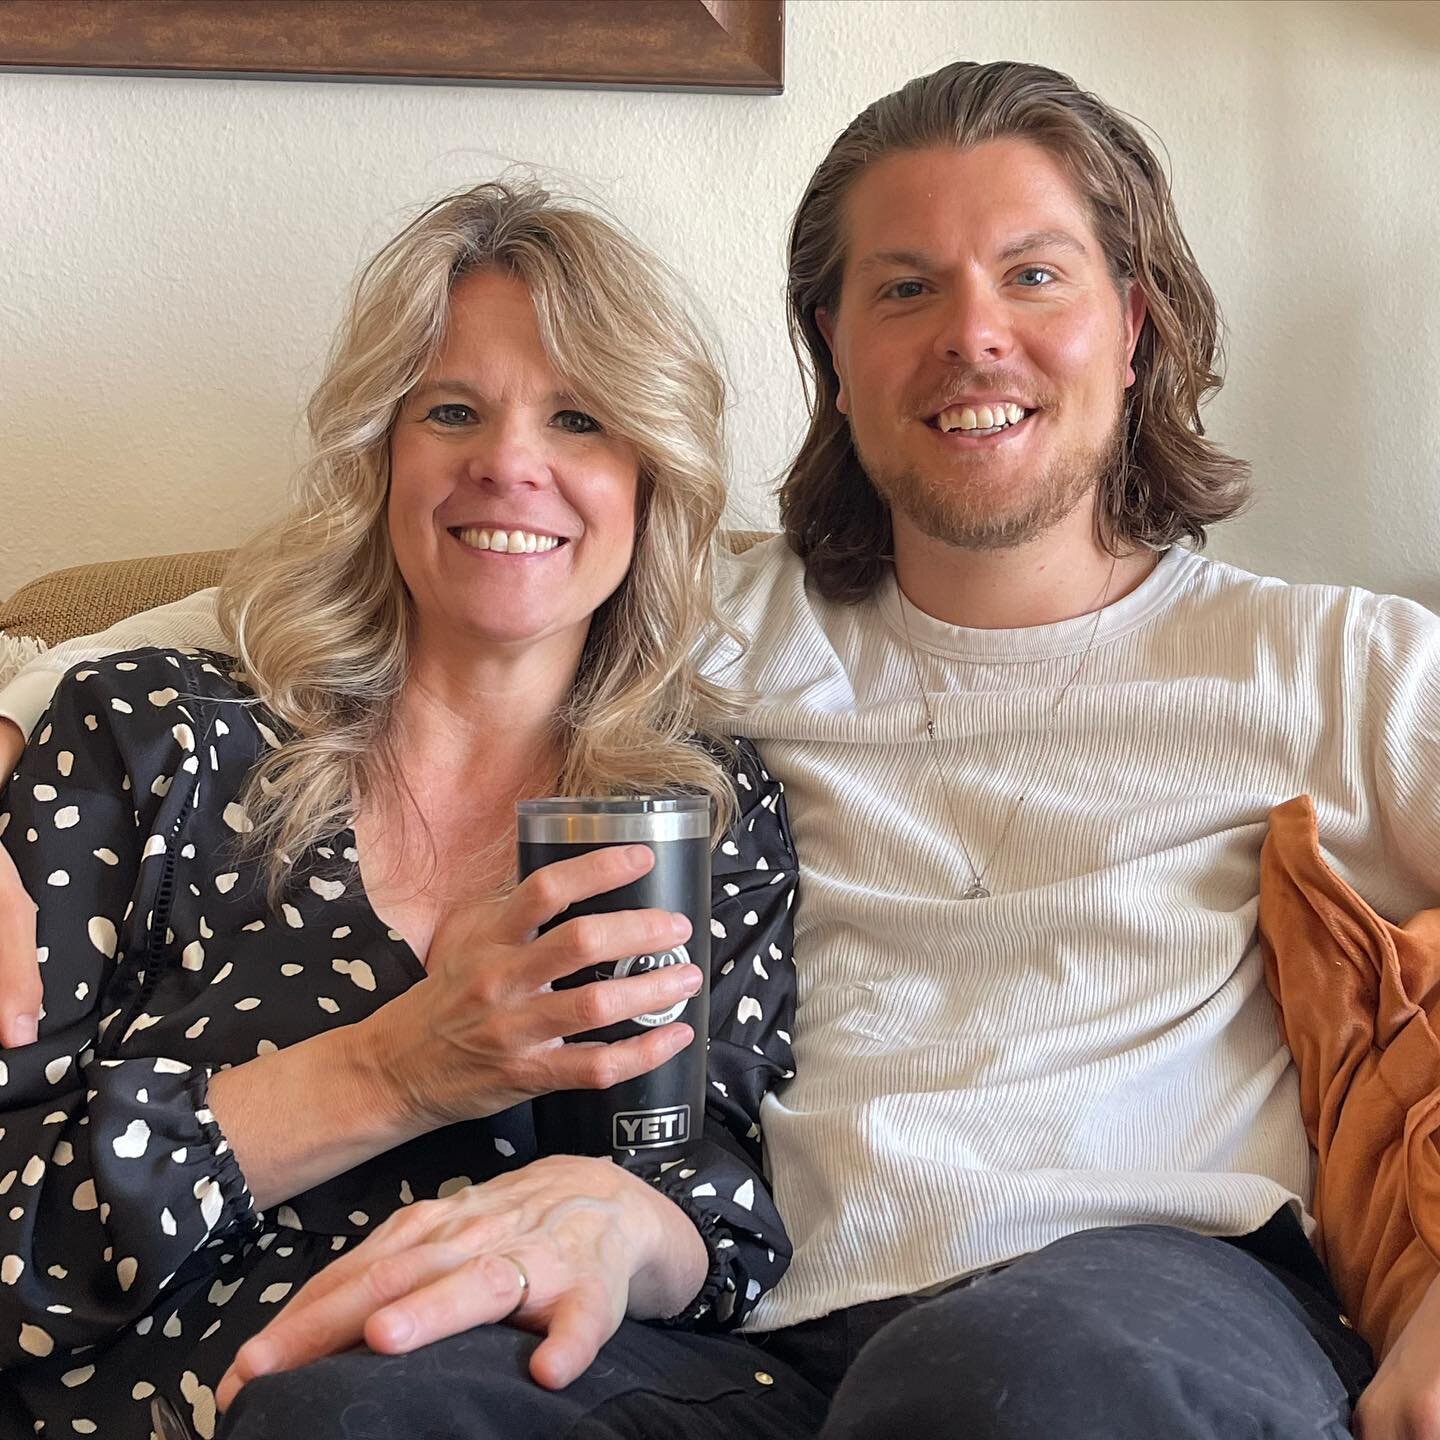 &ldquo;How do I know I&rsquo;m accomplishing God&rsquo;s purposes for my life?&rdquo; 

There we were, once again, trying to solve one of the world&rsquo;s most universal questions..
 
Sipping coffee with one of my favorite people, my son Jon and I s